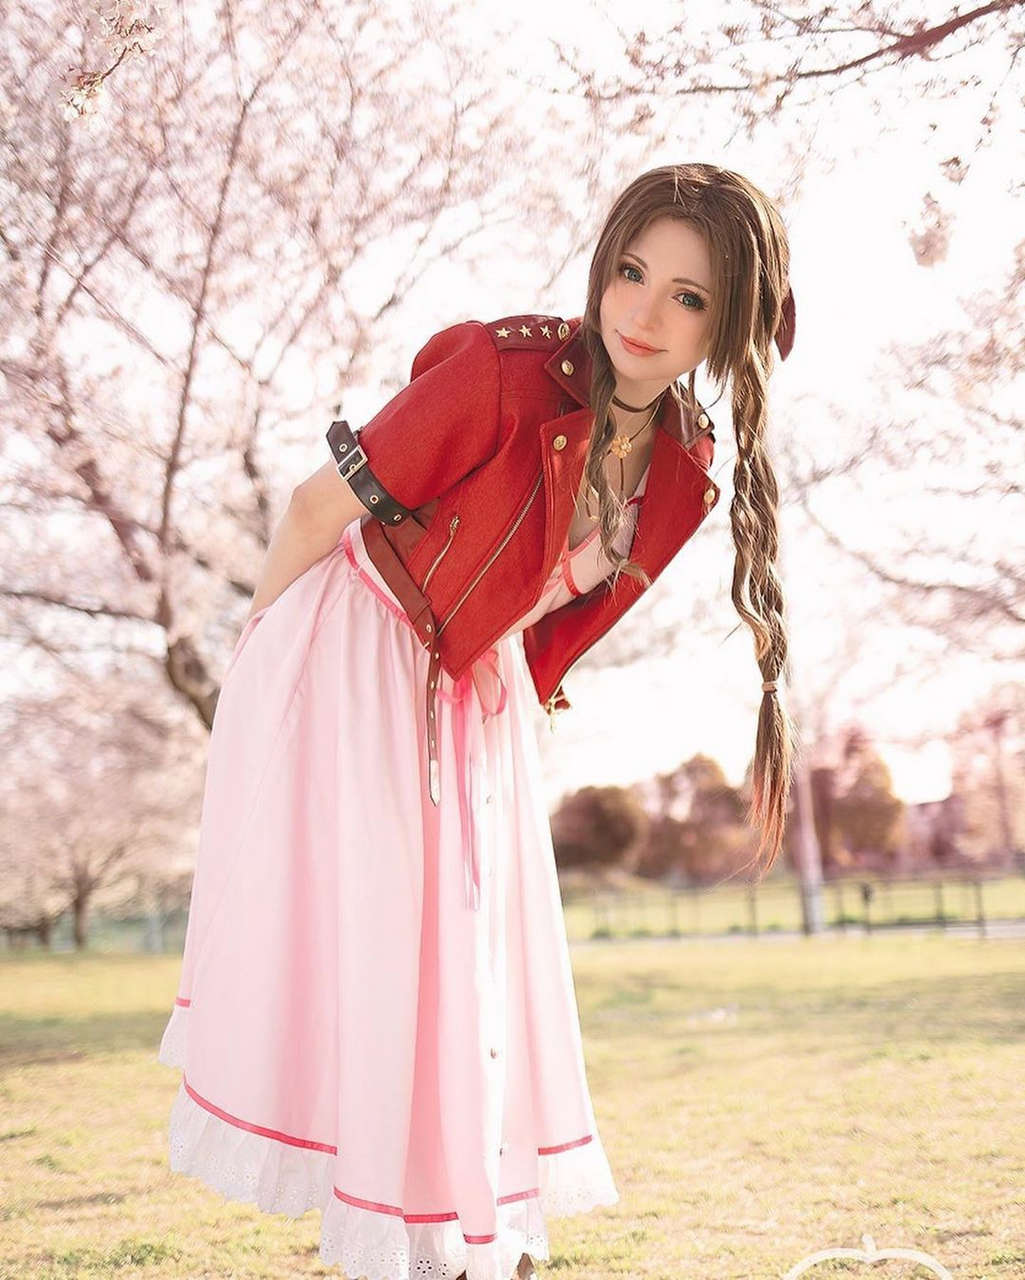 Aerith By Peachmilky From Game Final Fantasy 